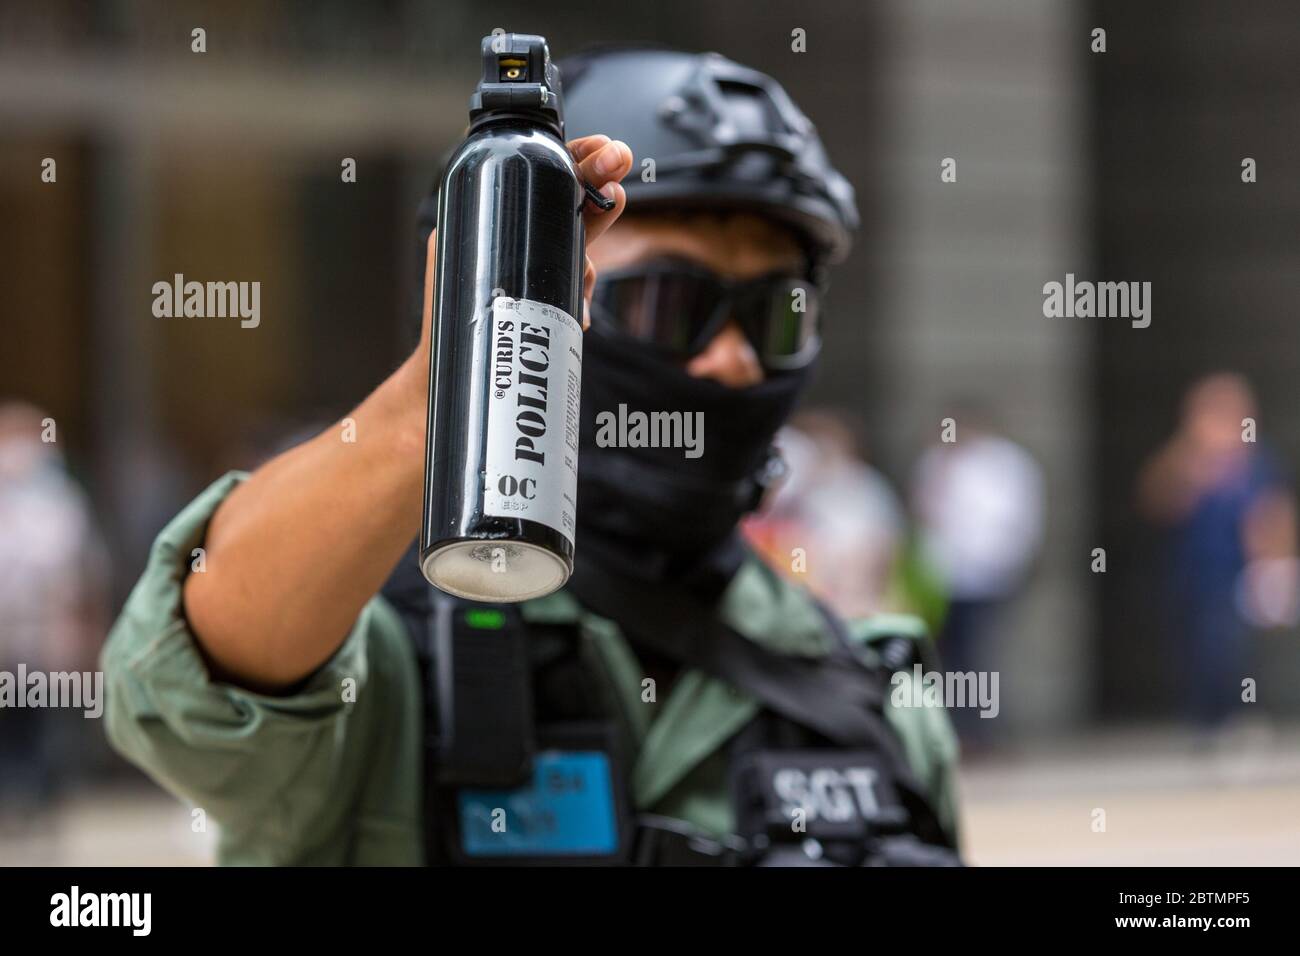 Central, Hong Kong. 27 May, 2020 Hong Kong Protest Anti-National Anthem Law. Police officer threatens with pepper spray. Credit: David Ogg / Alamy Live News Stock Photo